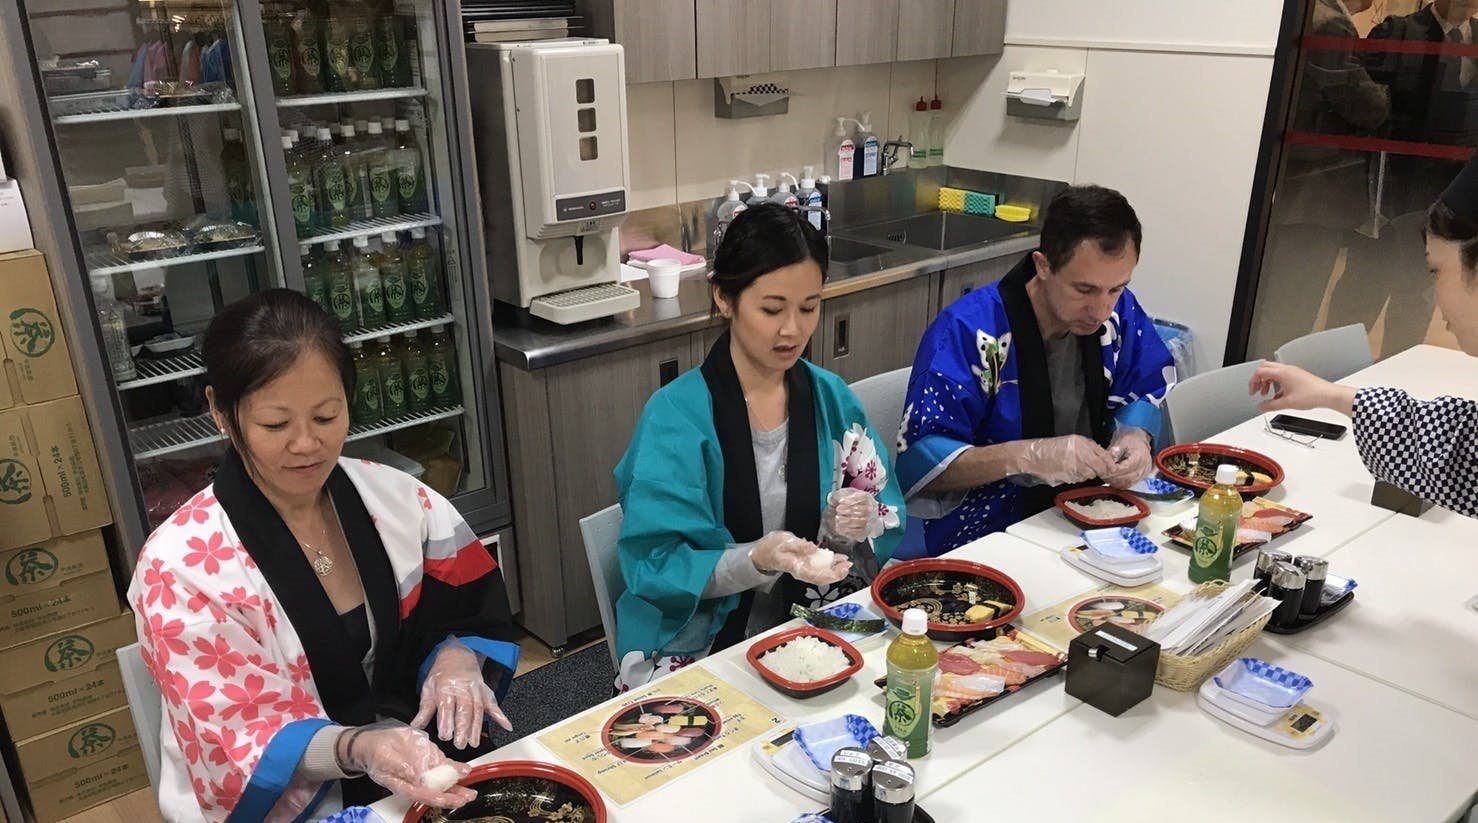 Sushi Making Experience in Dotonbori with 8 Pieces of Sushi